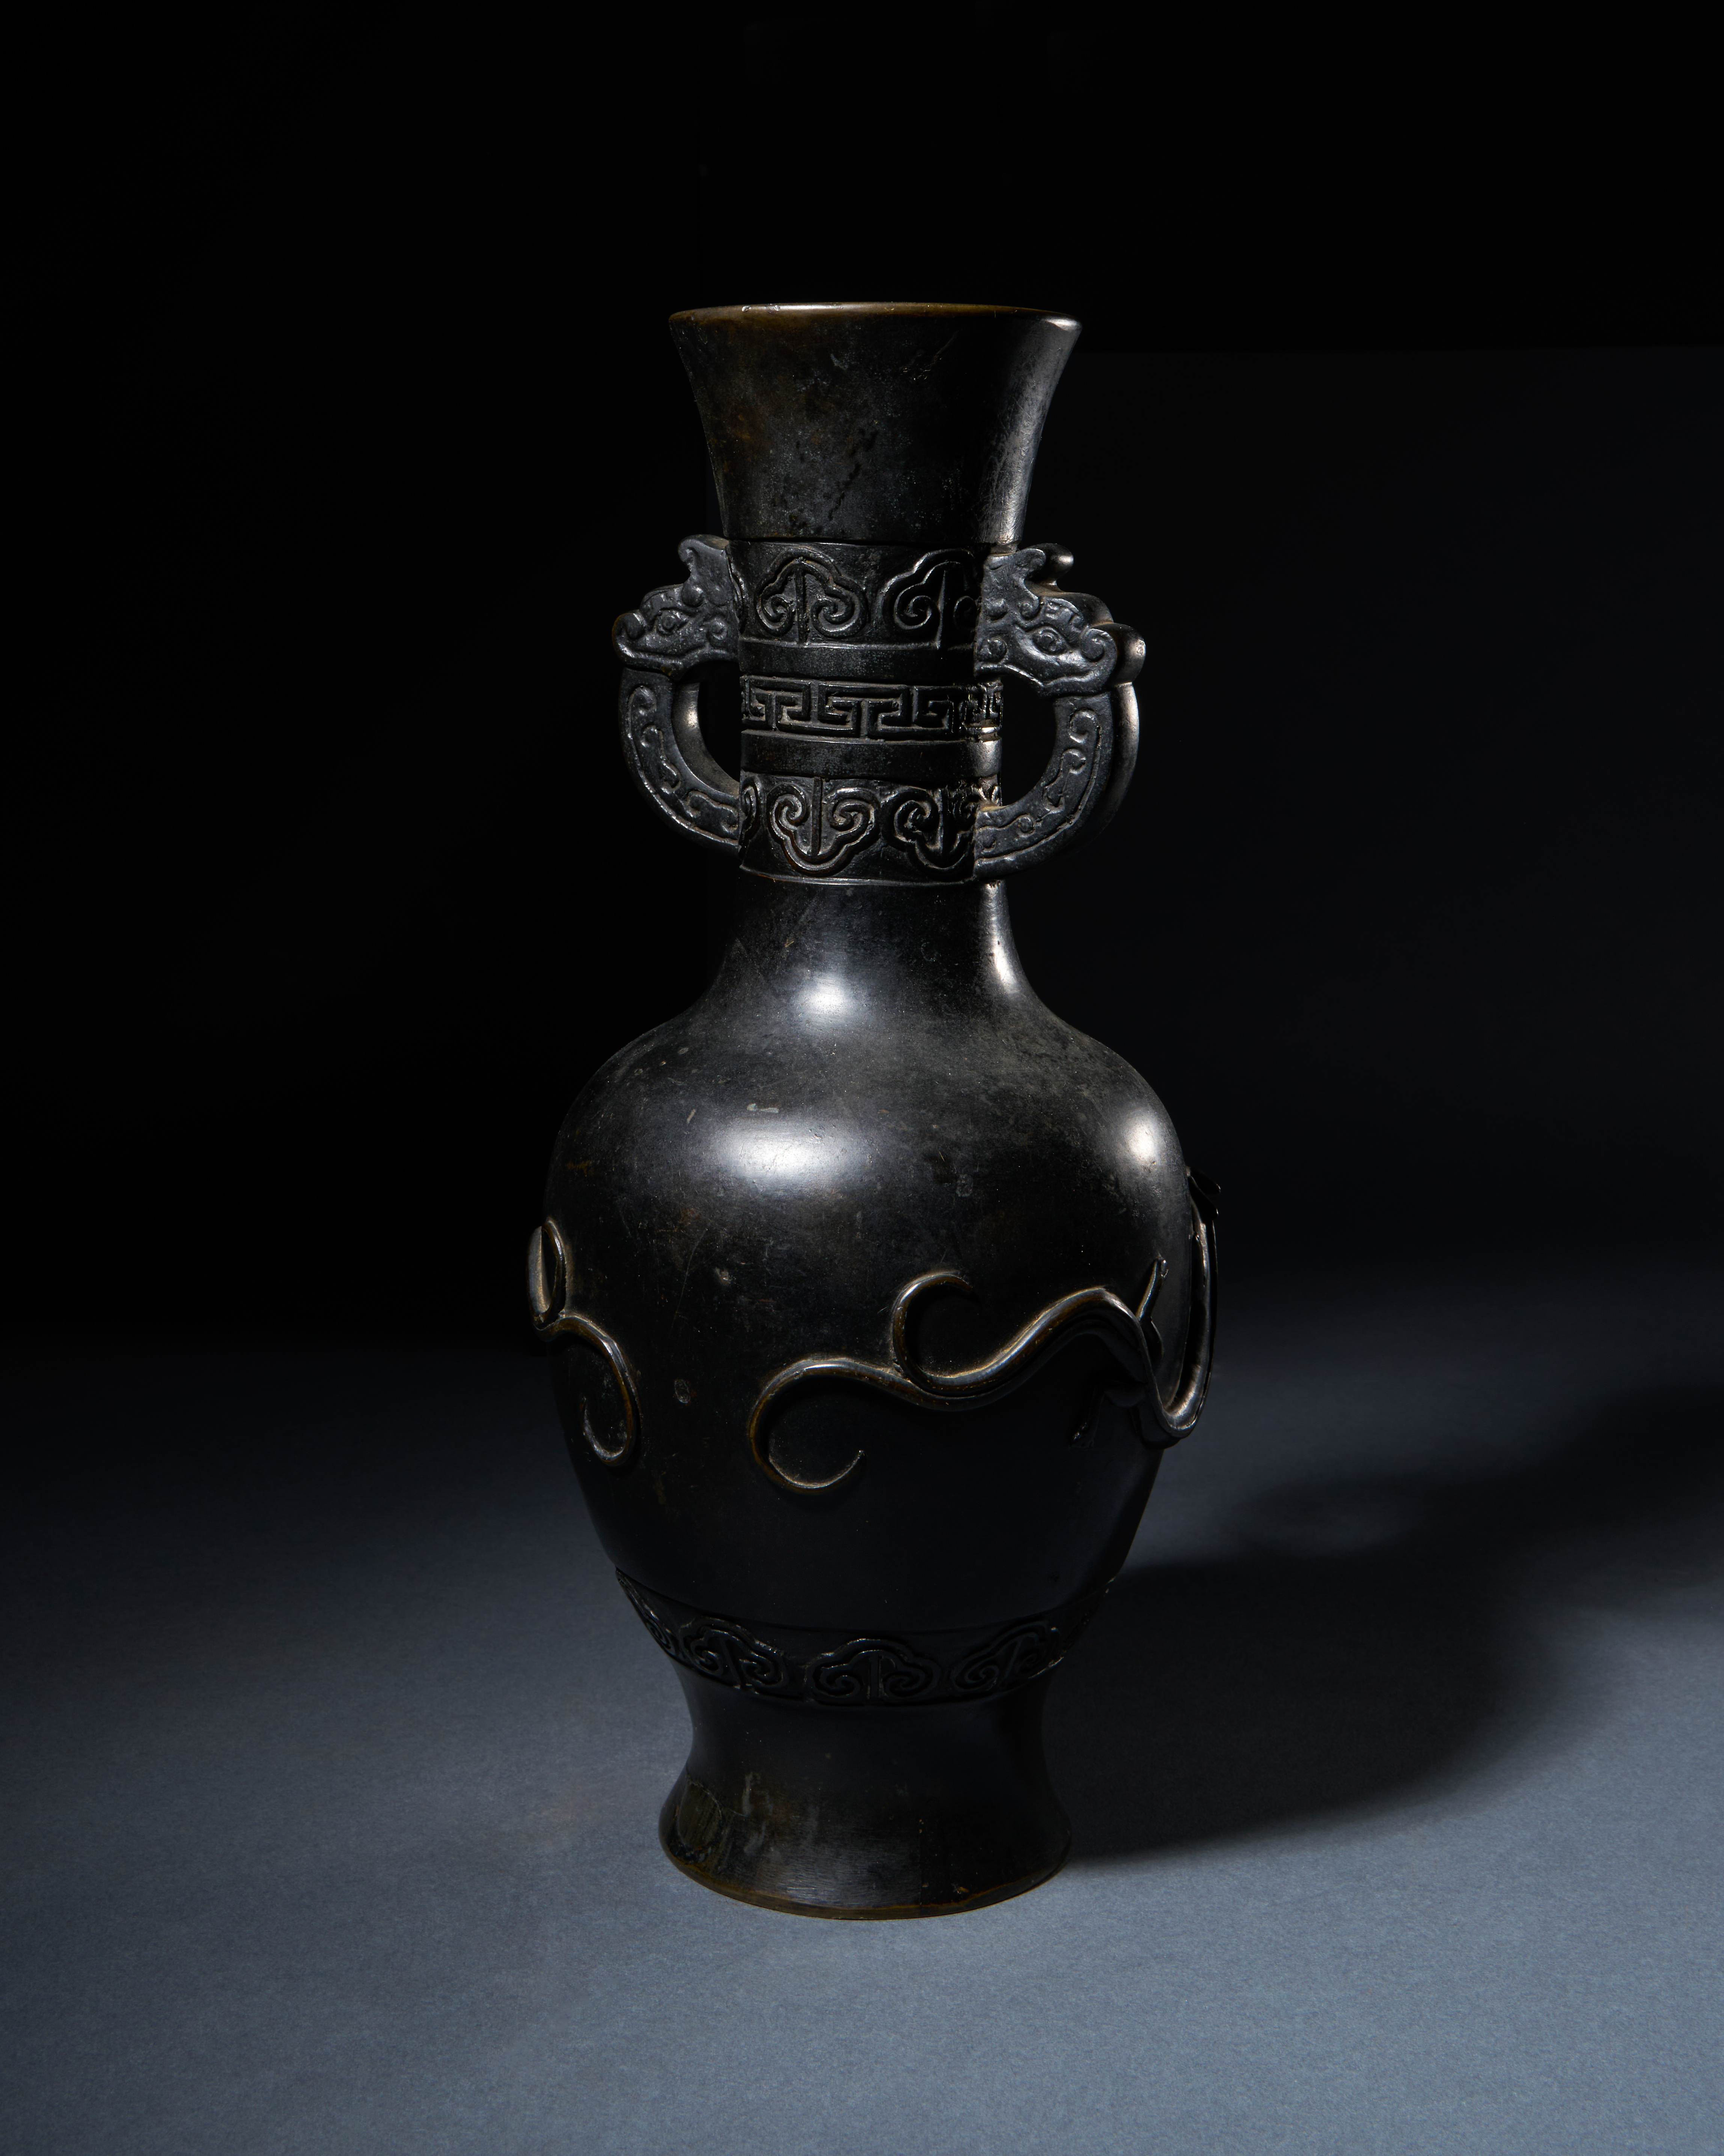 A CHINESE BRONZE "QILIN" VASE, MING DYNASTY (1368-1644) - Image 2 of 5